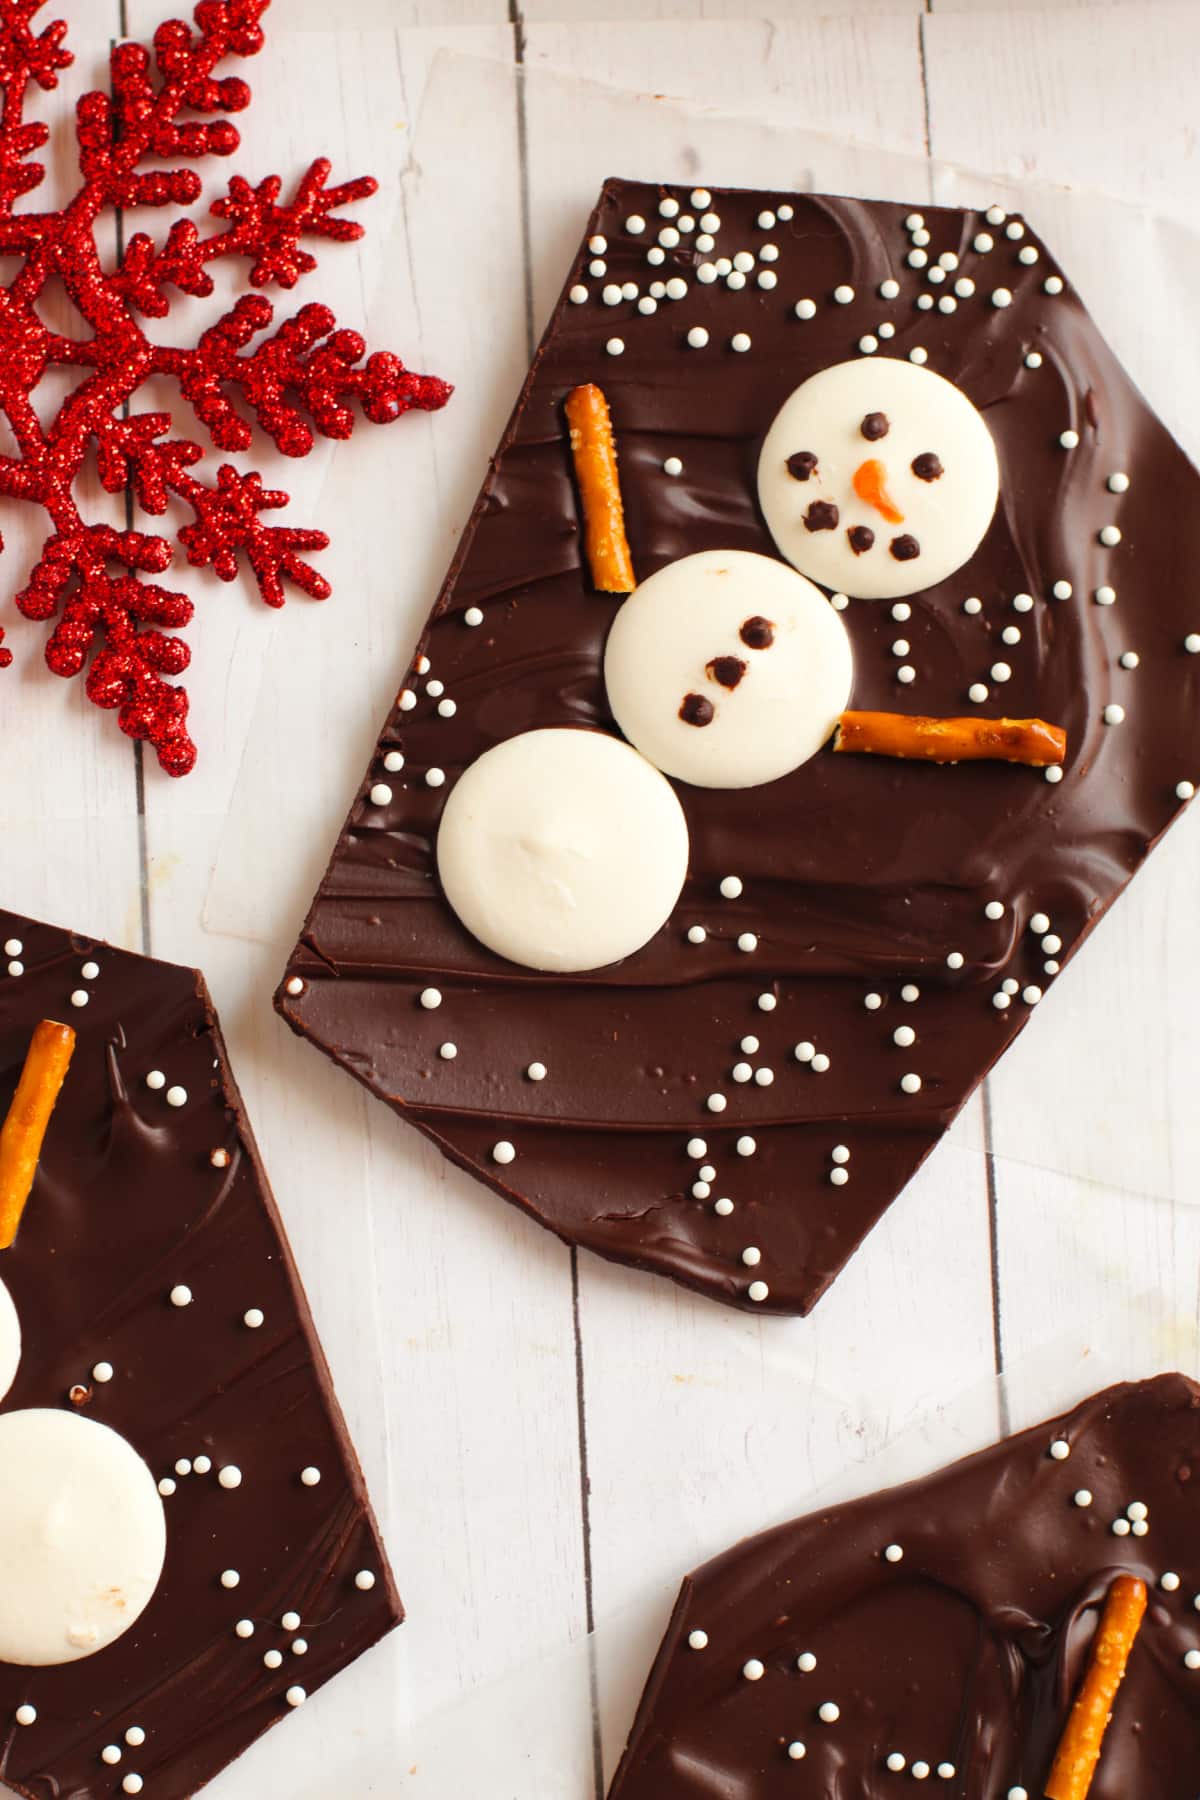 cute snowman made of white chocolate melts on dark chocolate